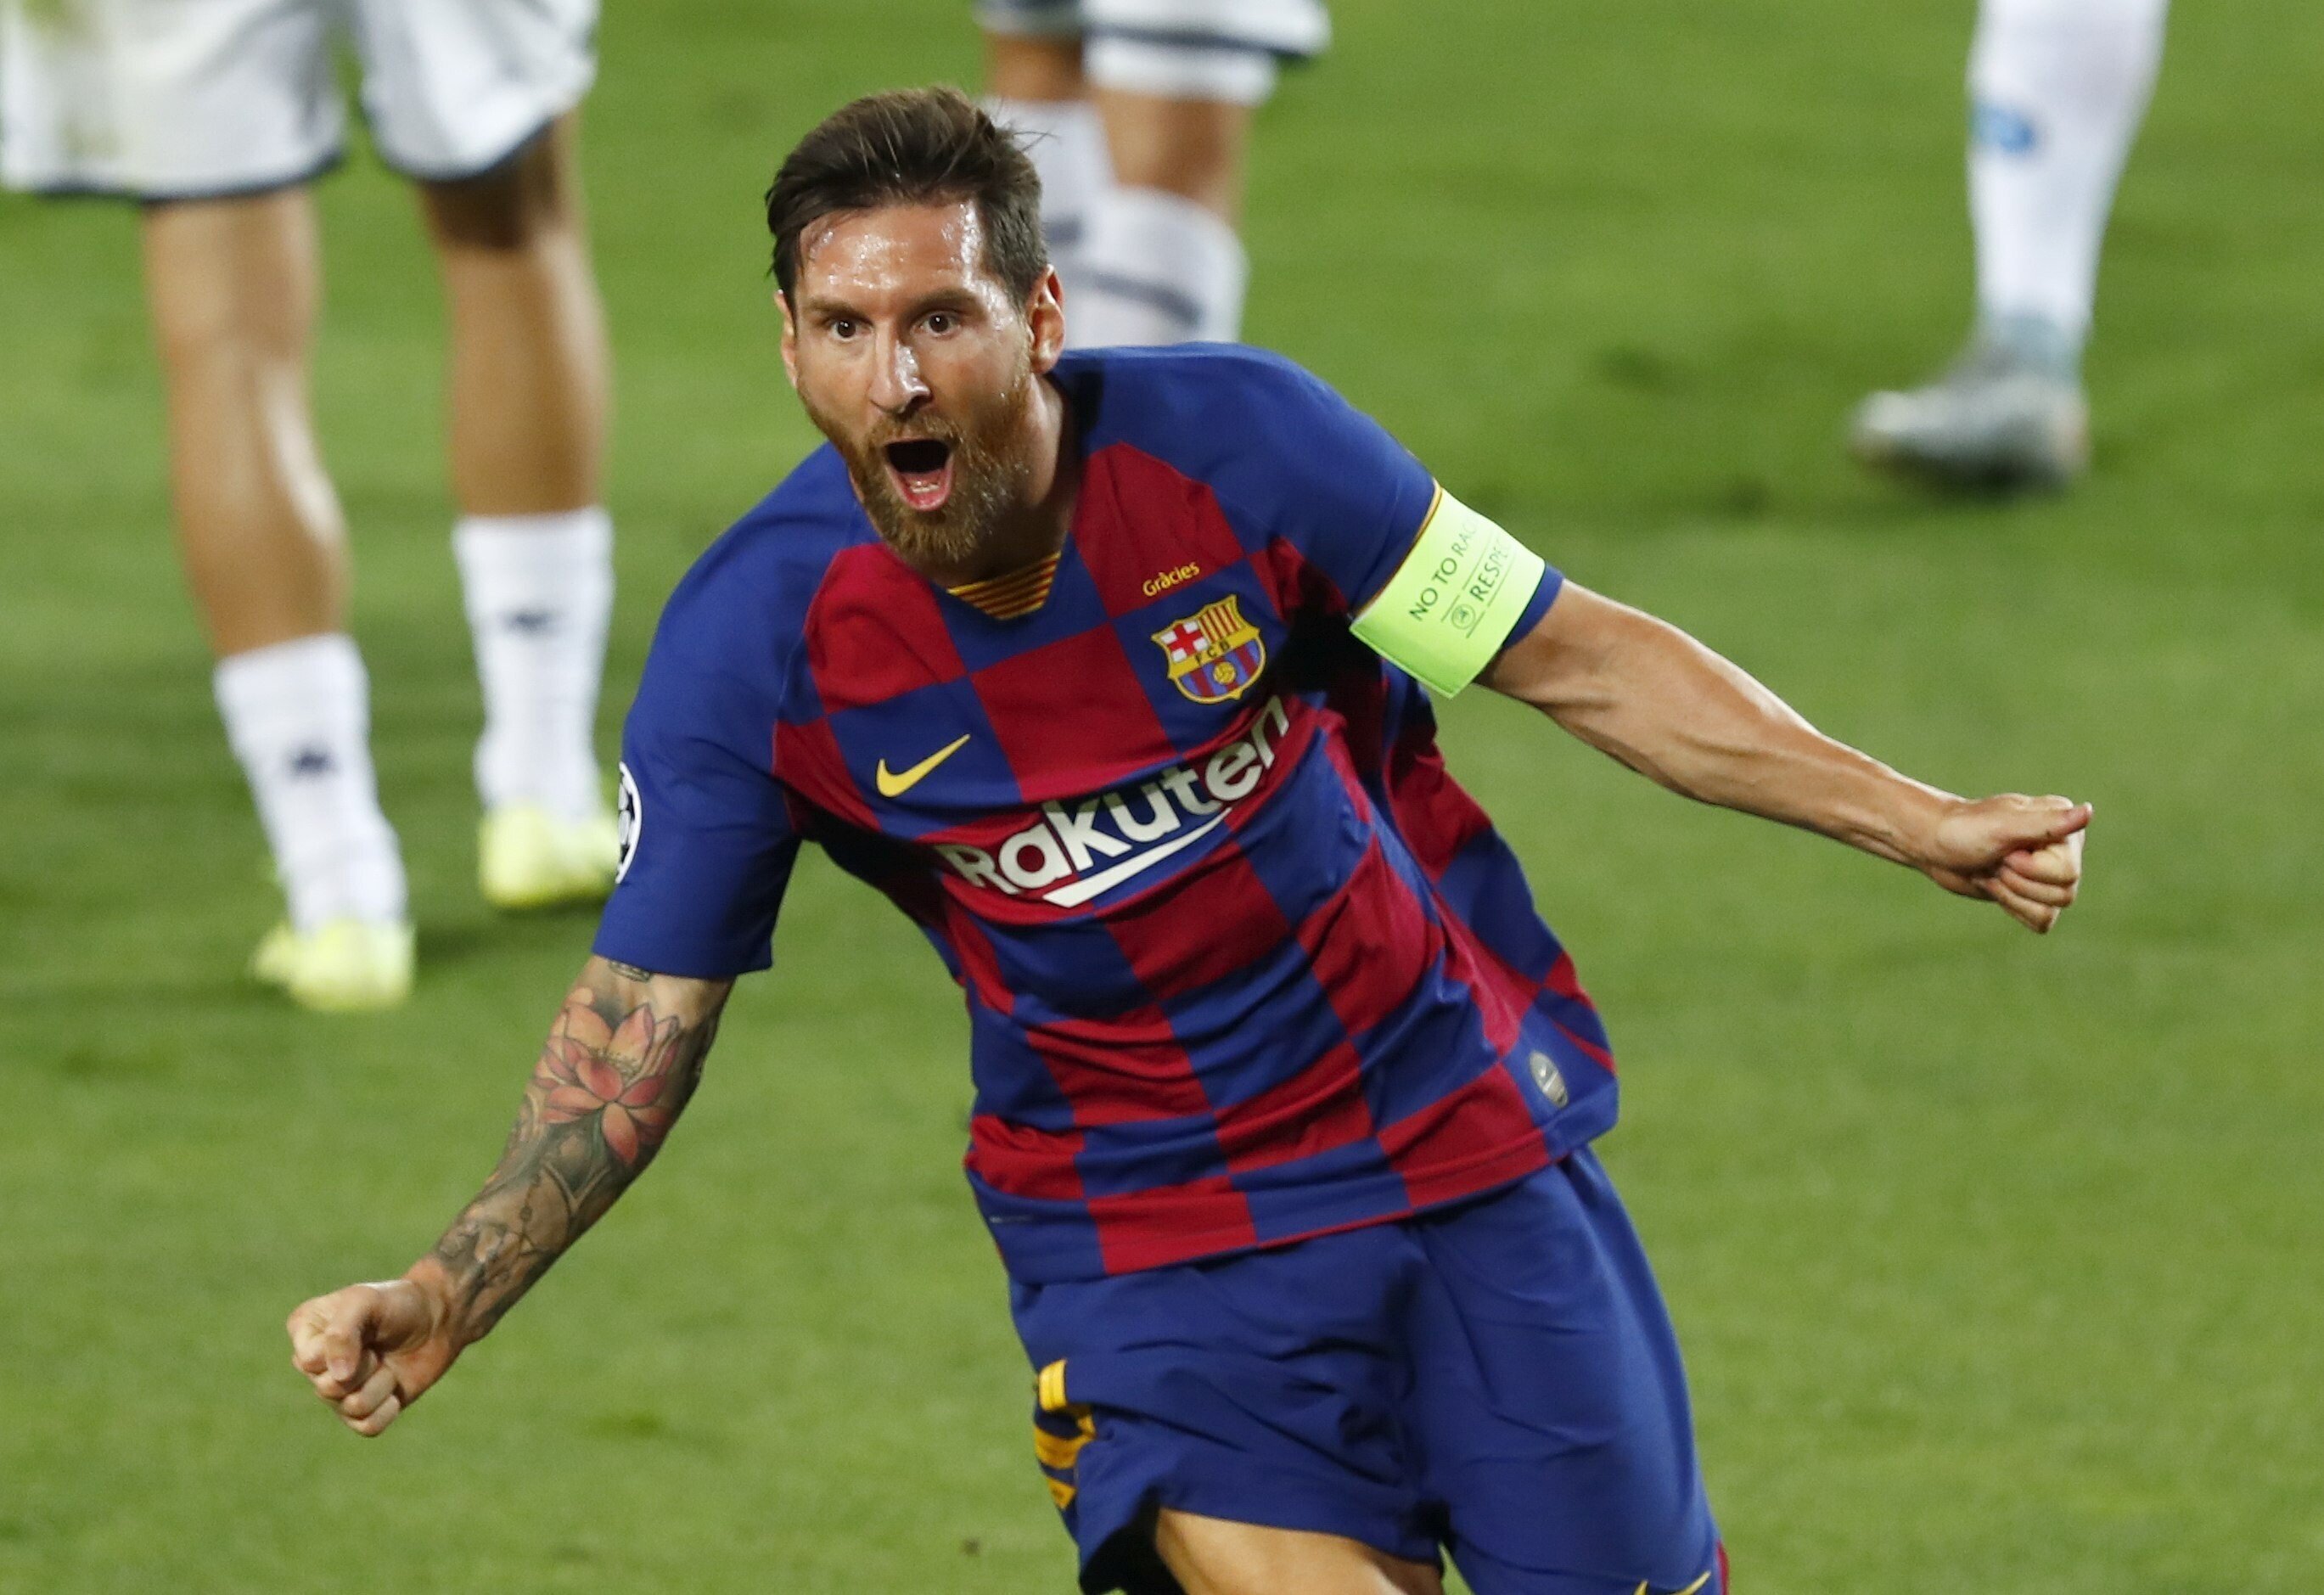 Barcelona's Lionel Messi celebrates scoring against Napoli at the Camp Nou in the Uefa Champions League. Photo: AP